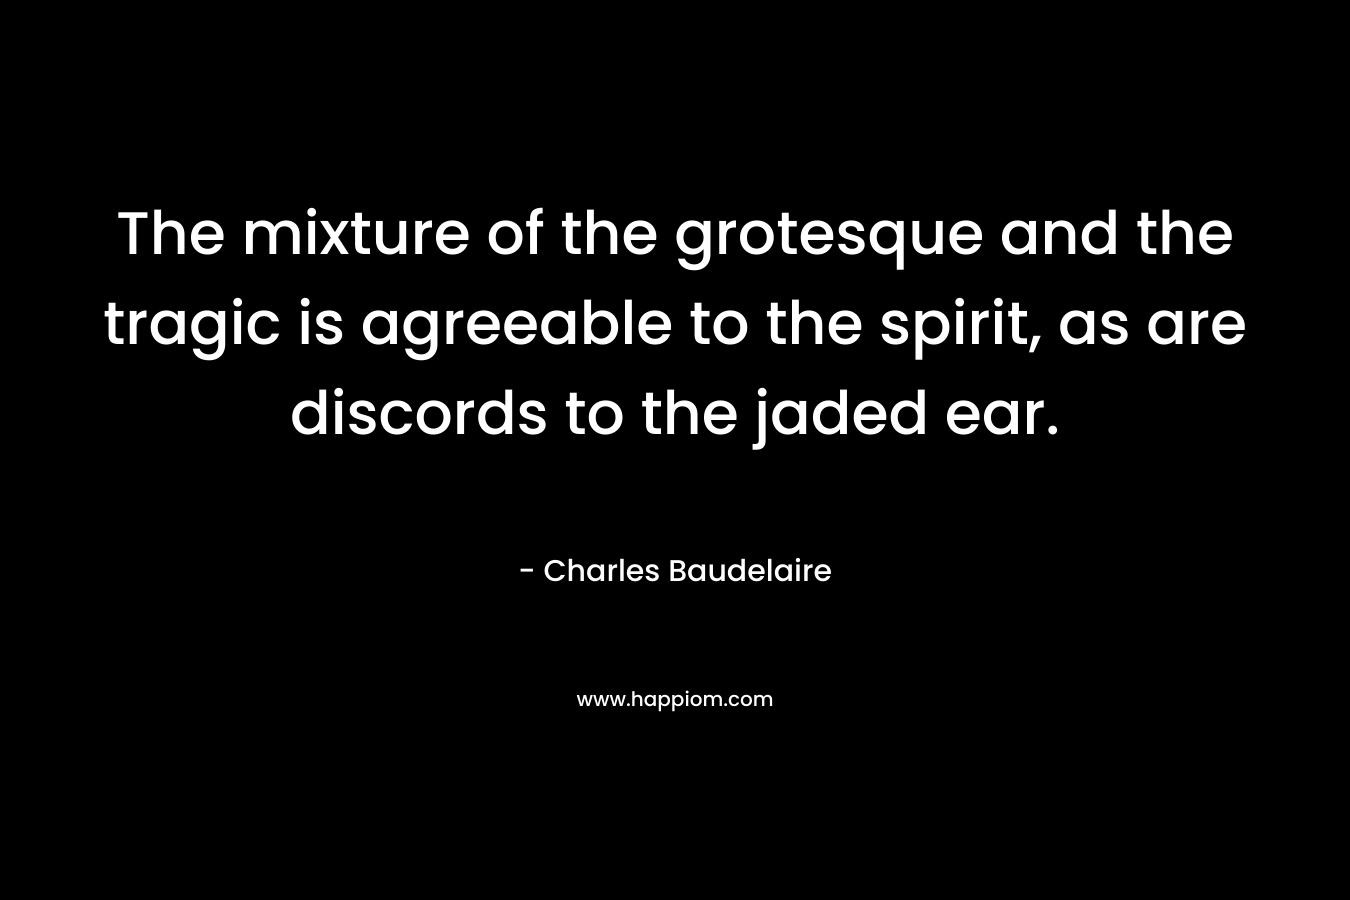 The mixture of the grotesque and the tragic is agreeable to the spirit, as are discords to the jaded ear. – Charles Baudelaire